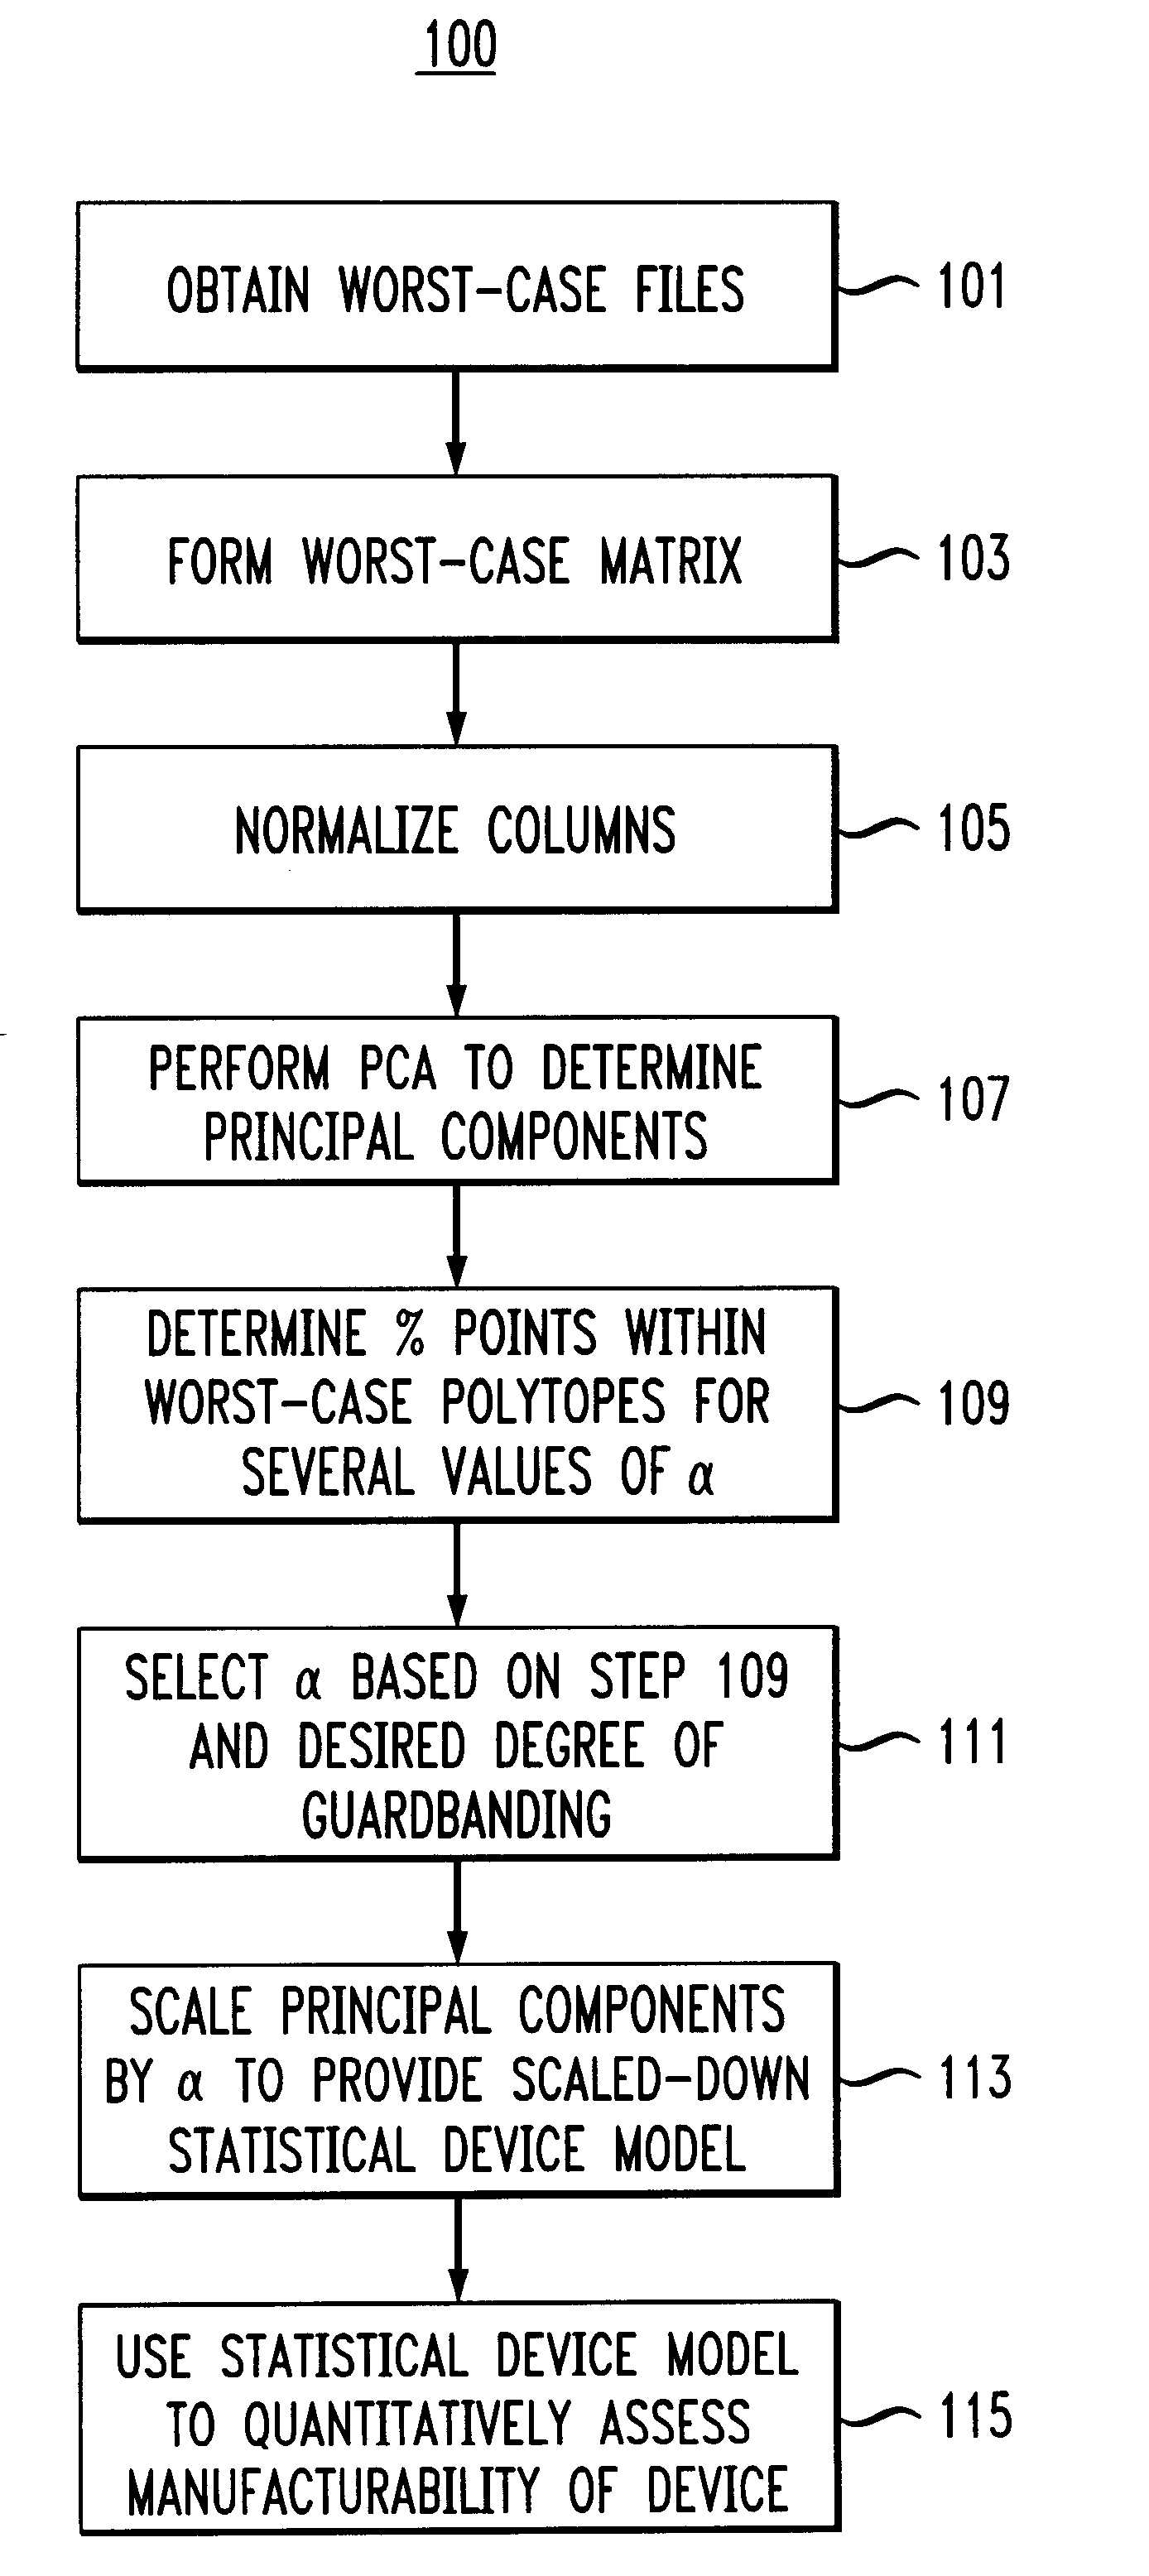 Deriving statistical device models from worst-case files